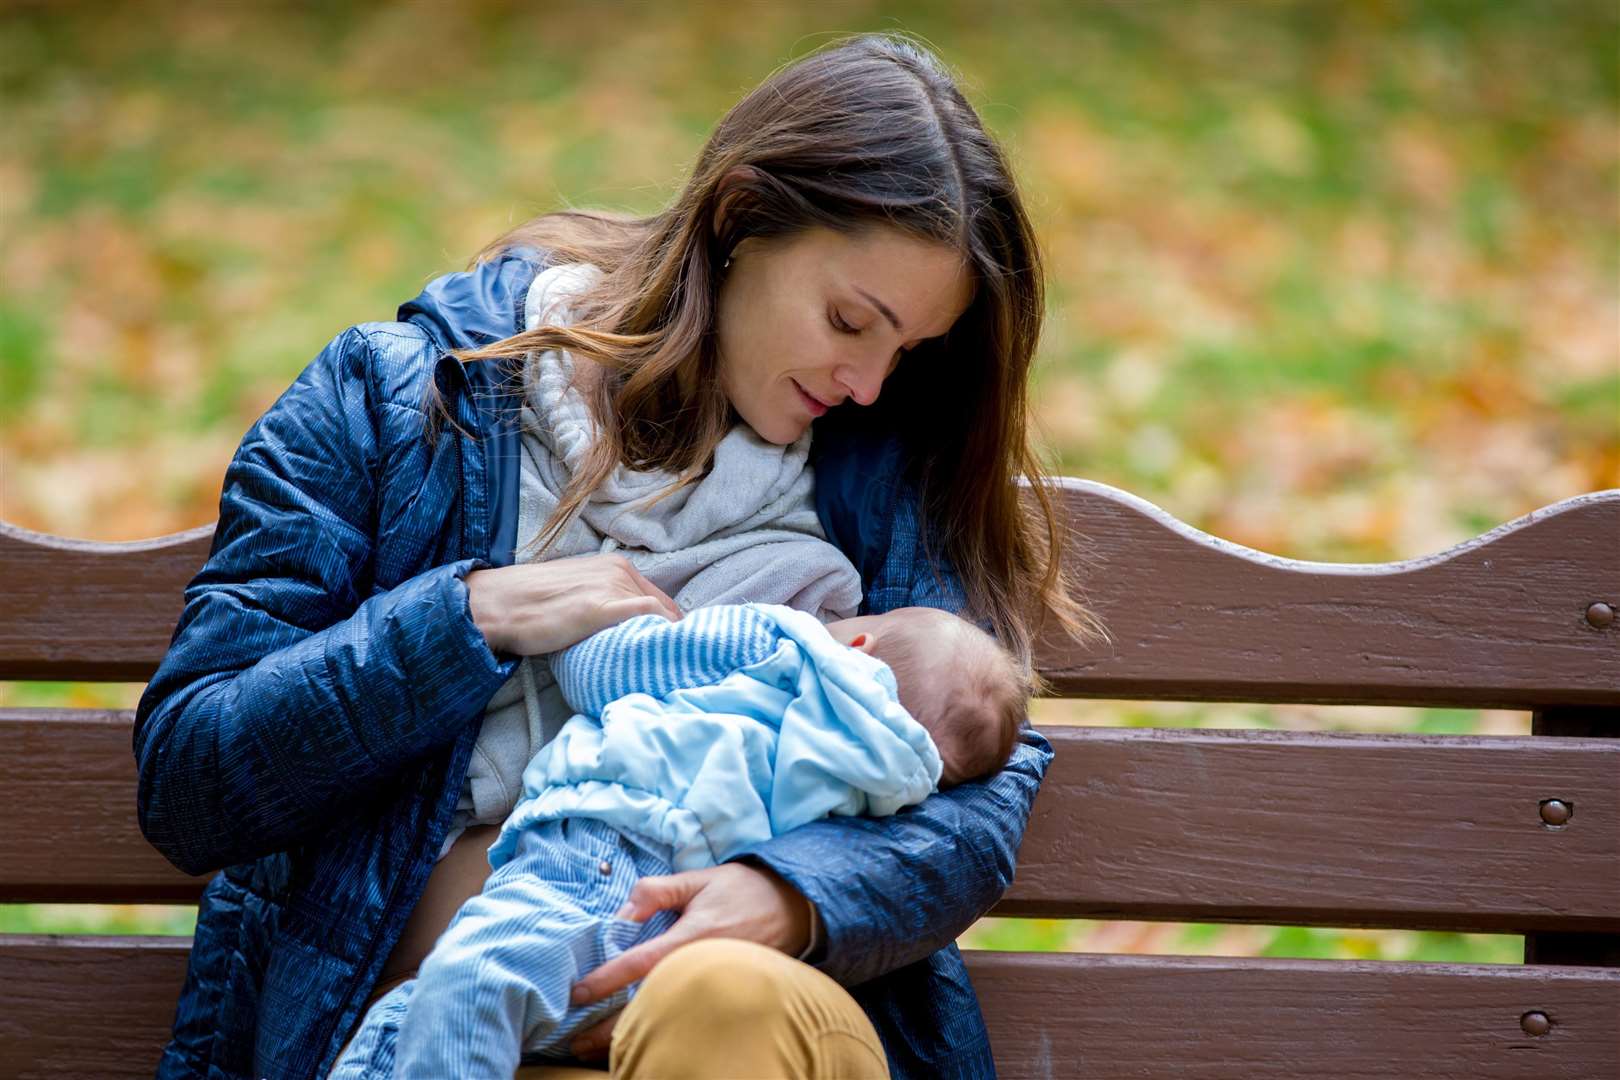 Helping mothers to feel comfortable breastfeeding in public is one of the issues the new website addresses